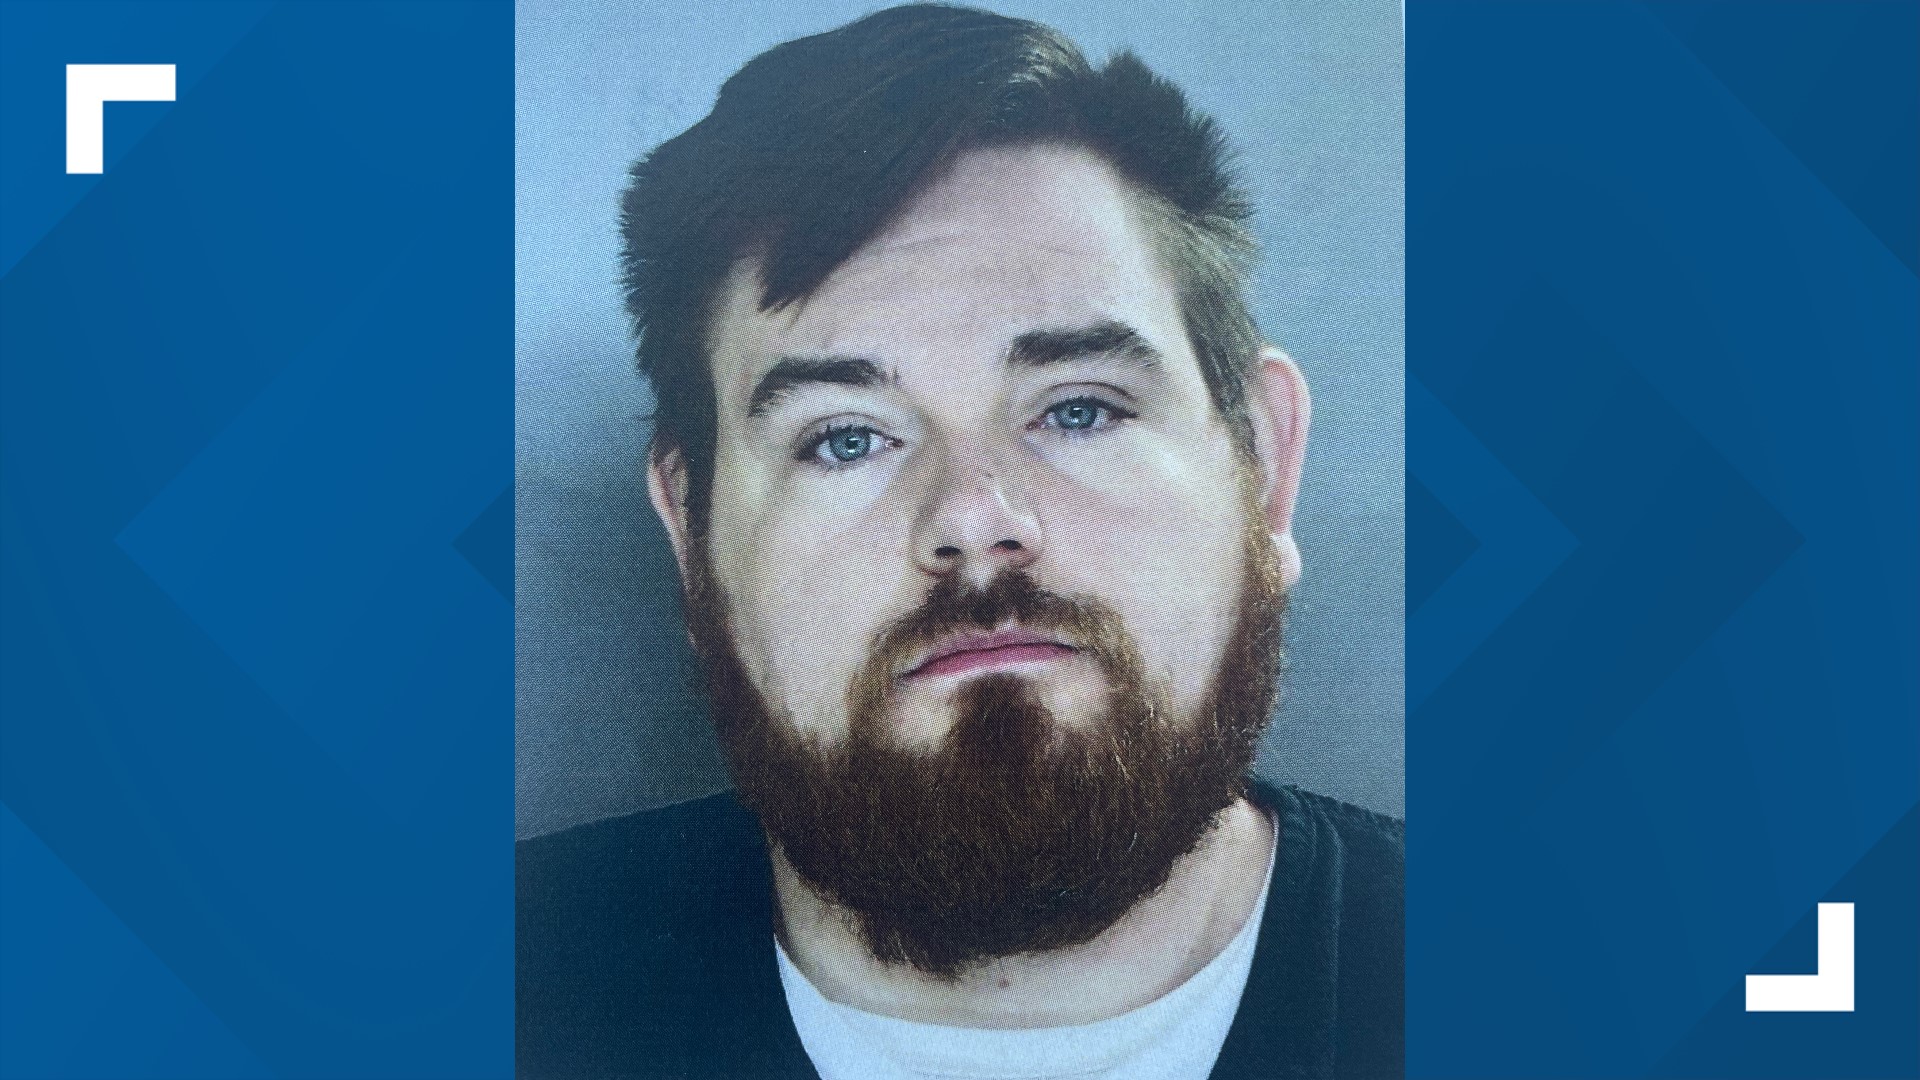 Vetter was charged in 2019 with child rape for allegedly assaulting a 12-year-old girl. The abuse began when the child was 7 years old.